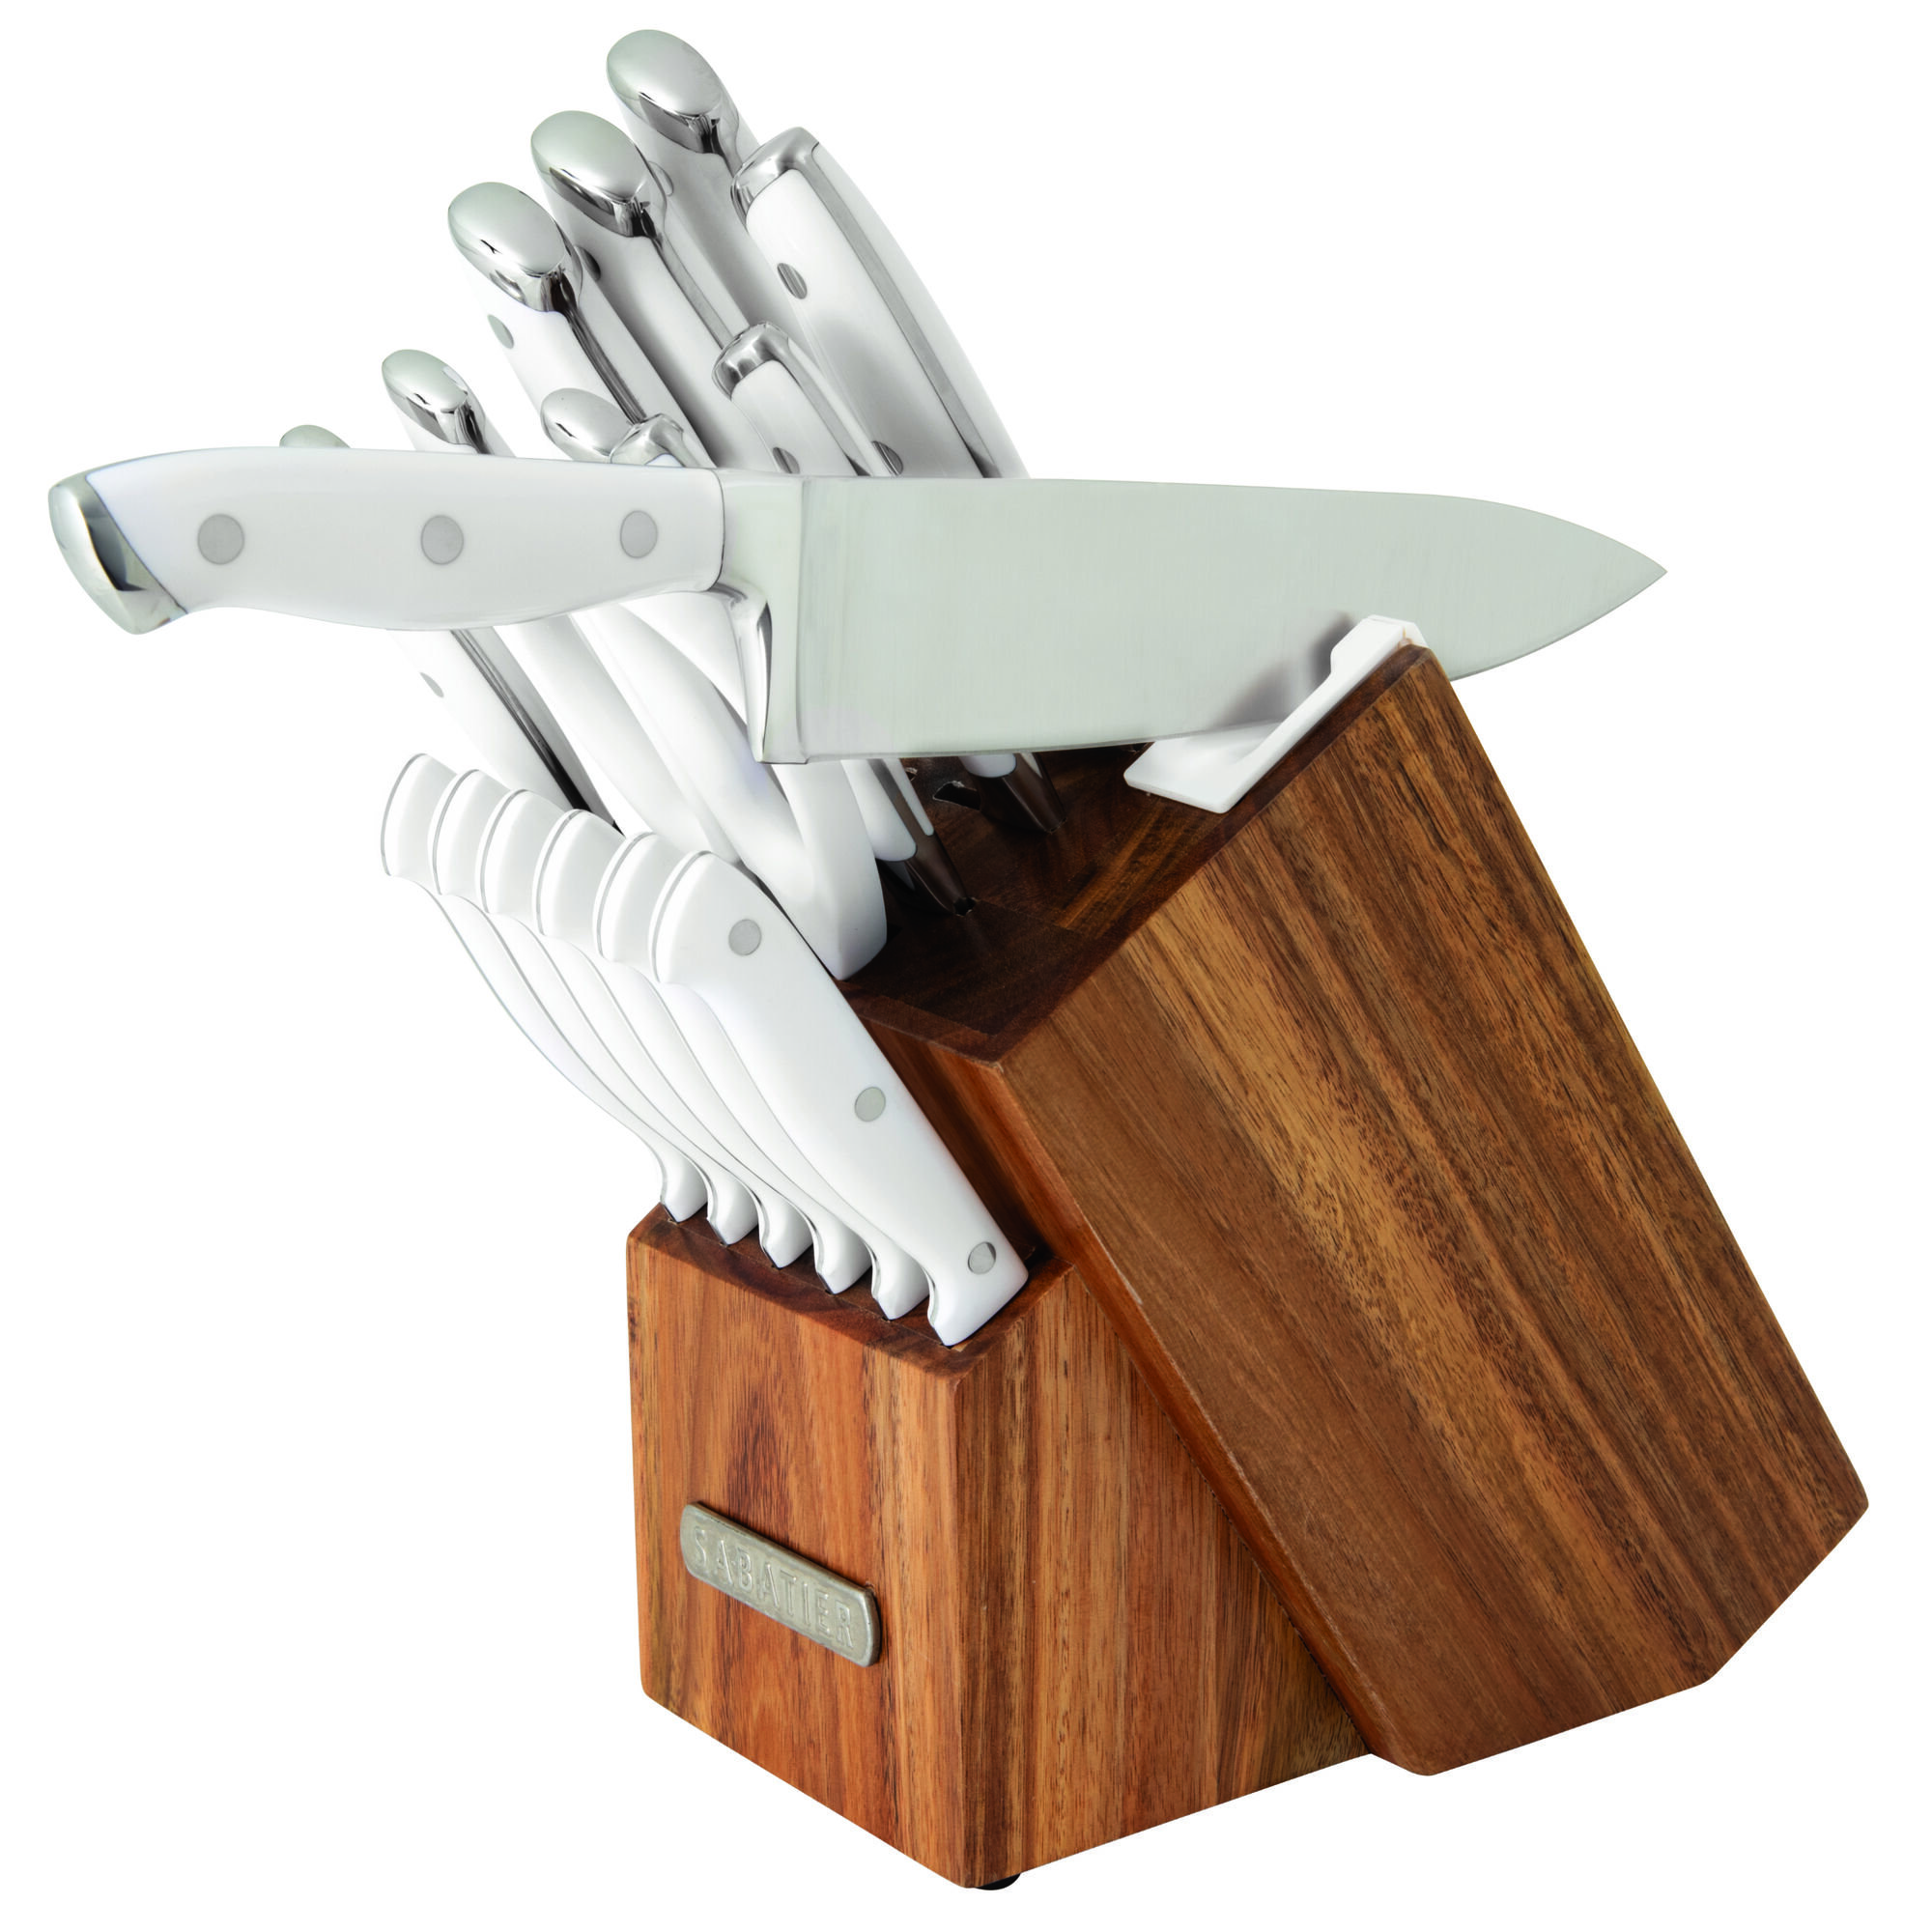 Schmidt Brothers Cutlery 14-Piece Acacia Series Forged Stainless Steel Knife Block Set with Acacia Wood Handles